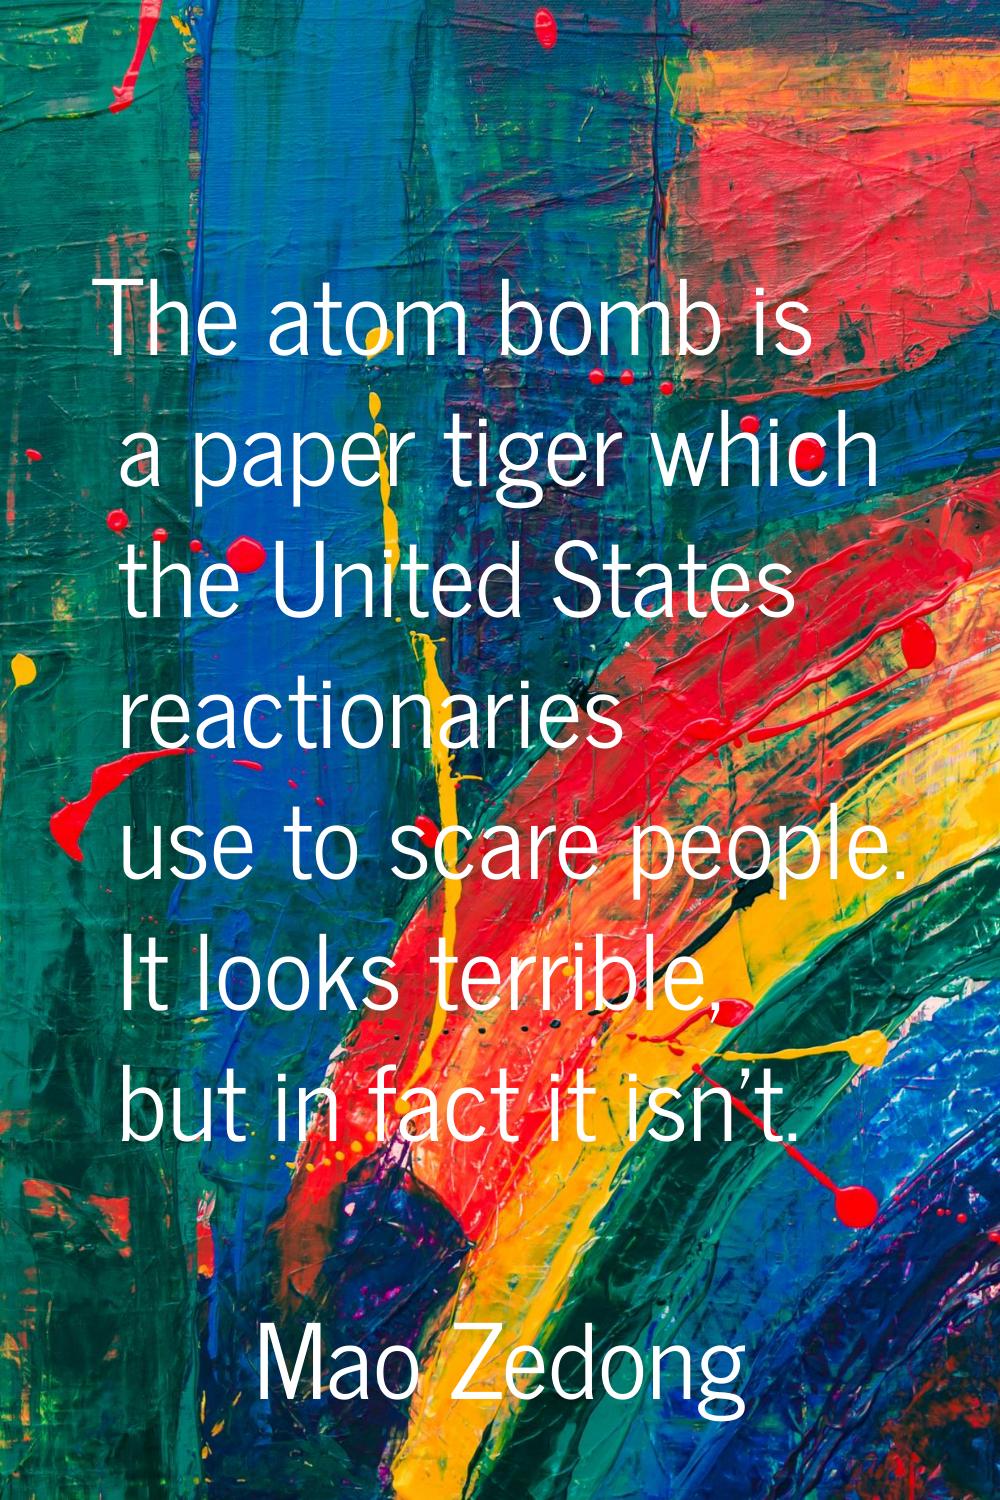 The atom bomb is a paper tiger which the United States reactionaries use to scare people. It looks 